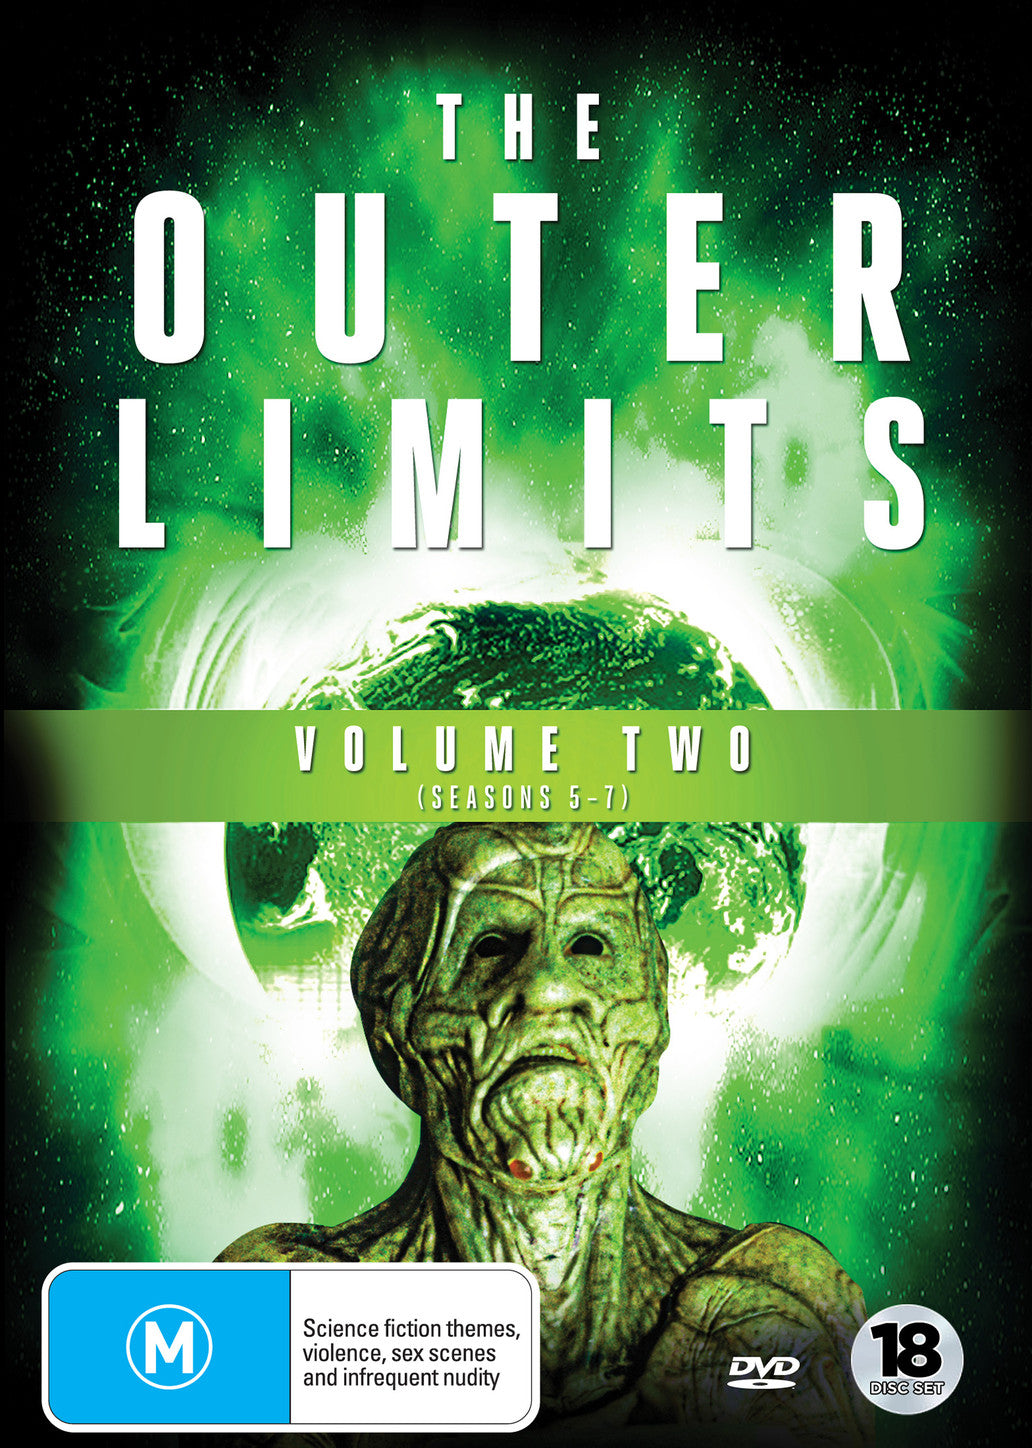 THE OUTER LIMITS VOLUME TWO (SEASONS 5-7)